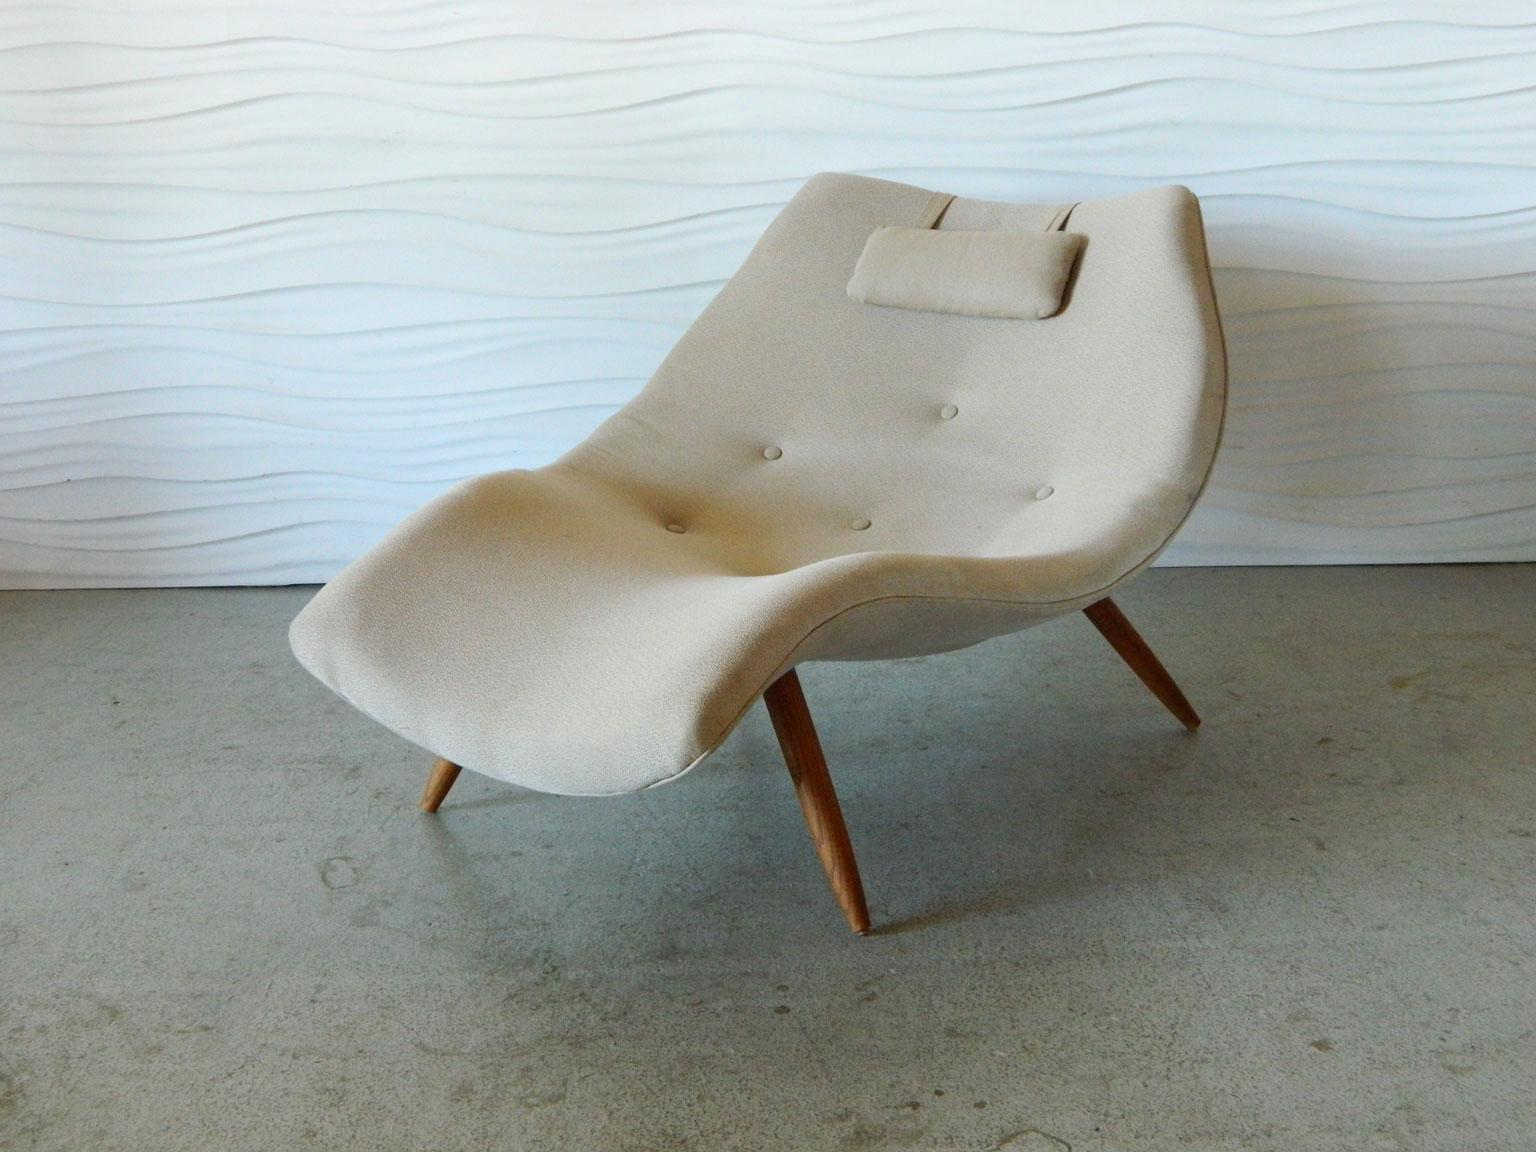 Sculptural chaise by American designer Adrian Pearsall for Craft Associates, model 1828C.